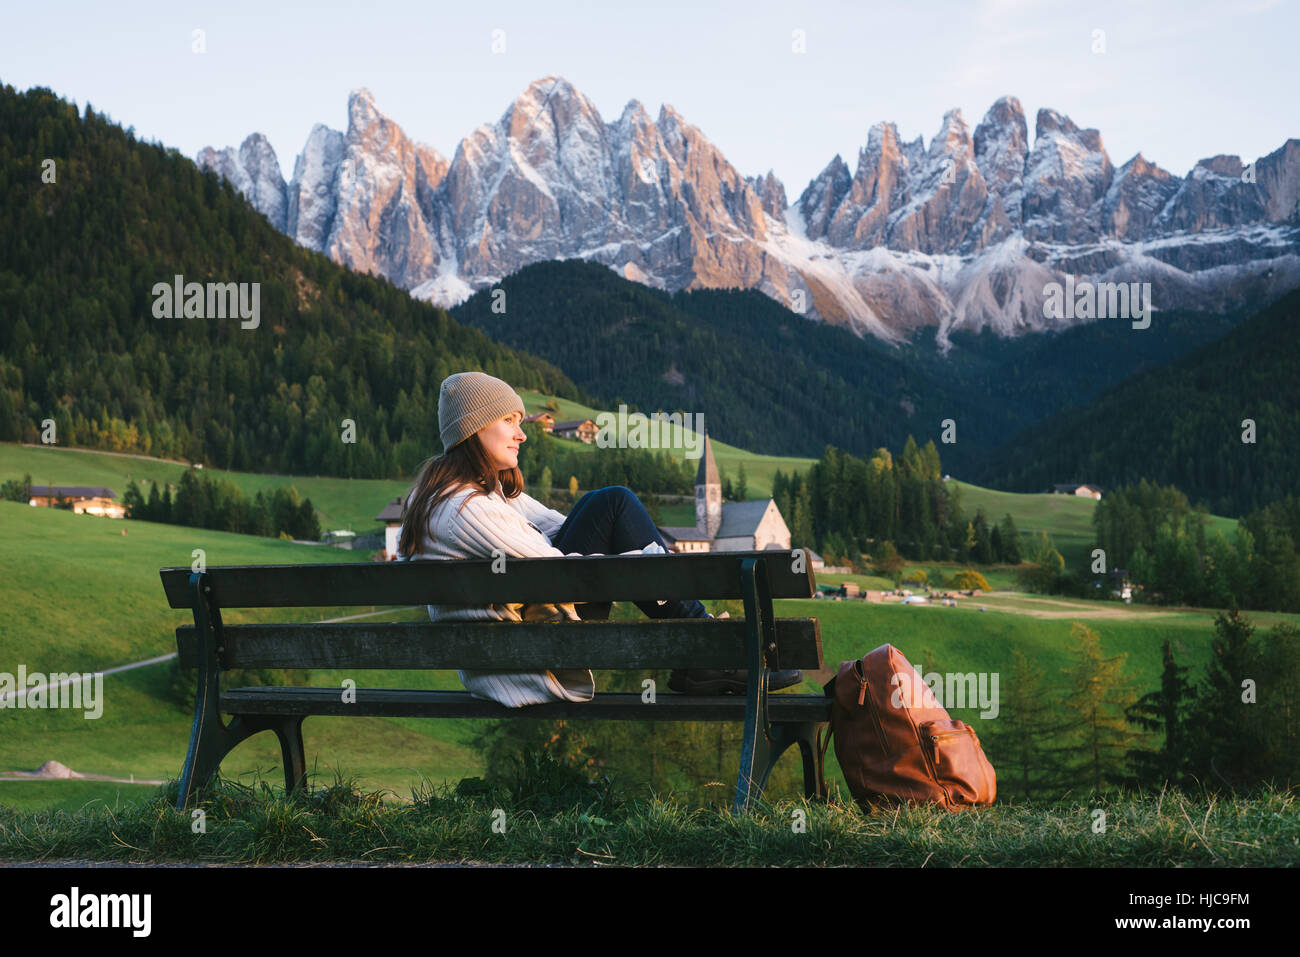 Woman relaxing on park bench, Santa Maddalena, Dolomite Alps, Val di Funes (Funes Valley), South Tyrol, Italy Stock Photo